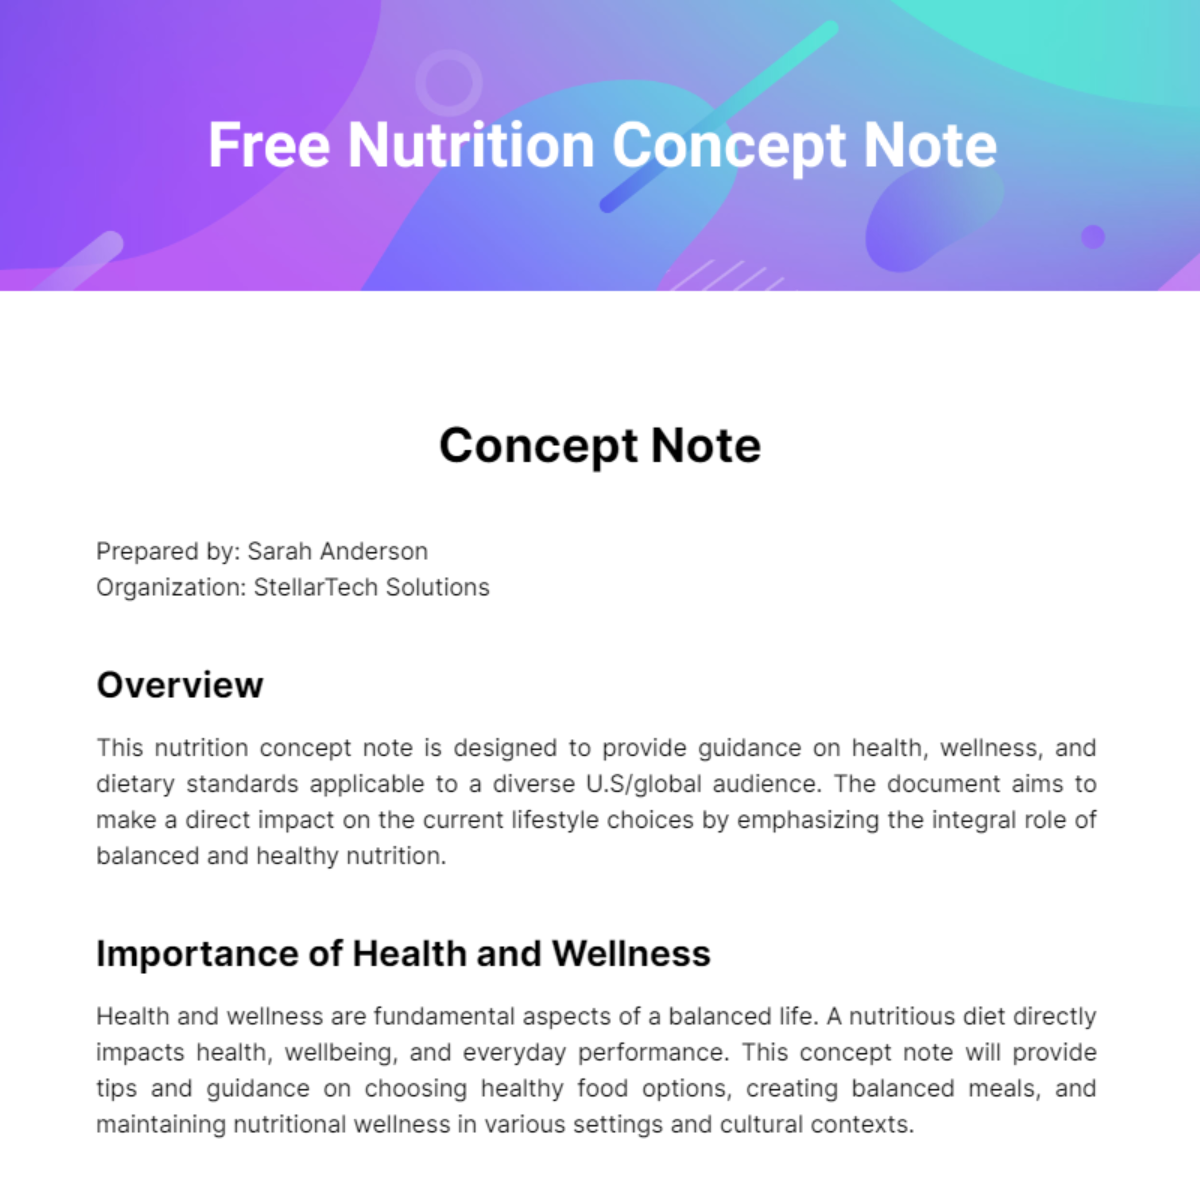 Free Nutrition Concept Note Template